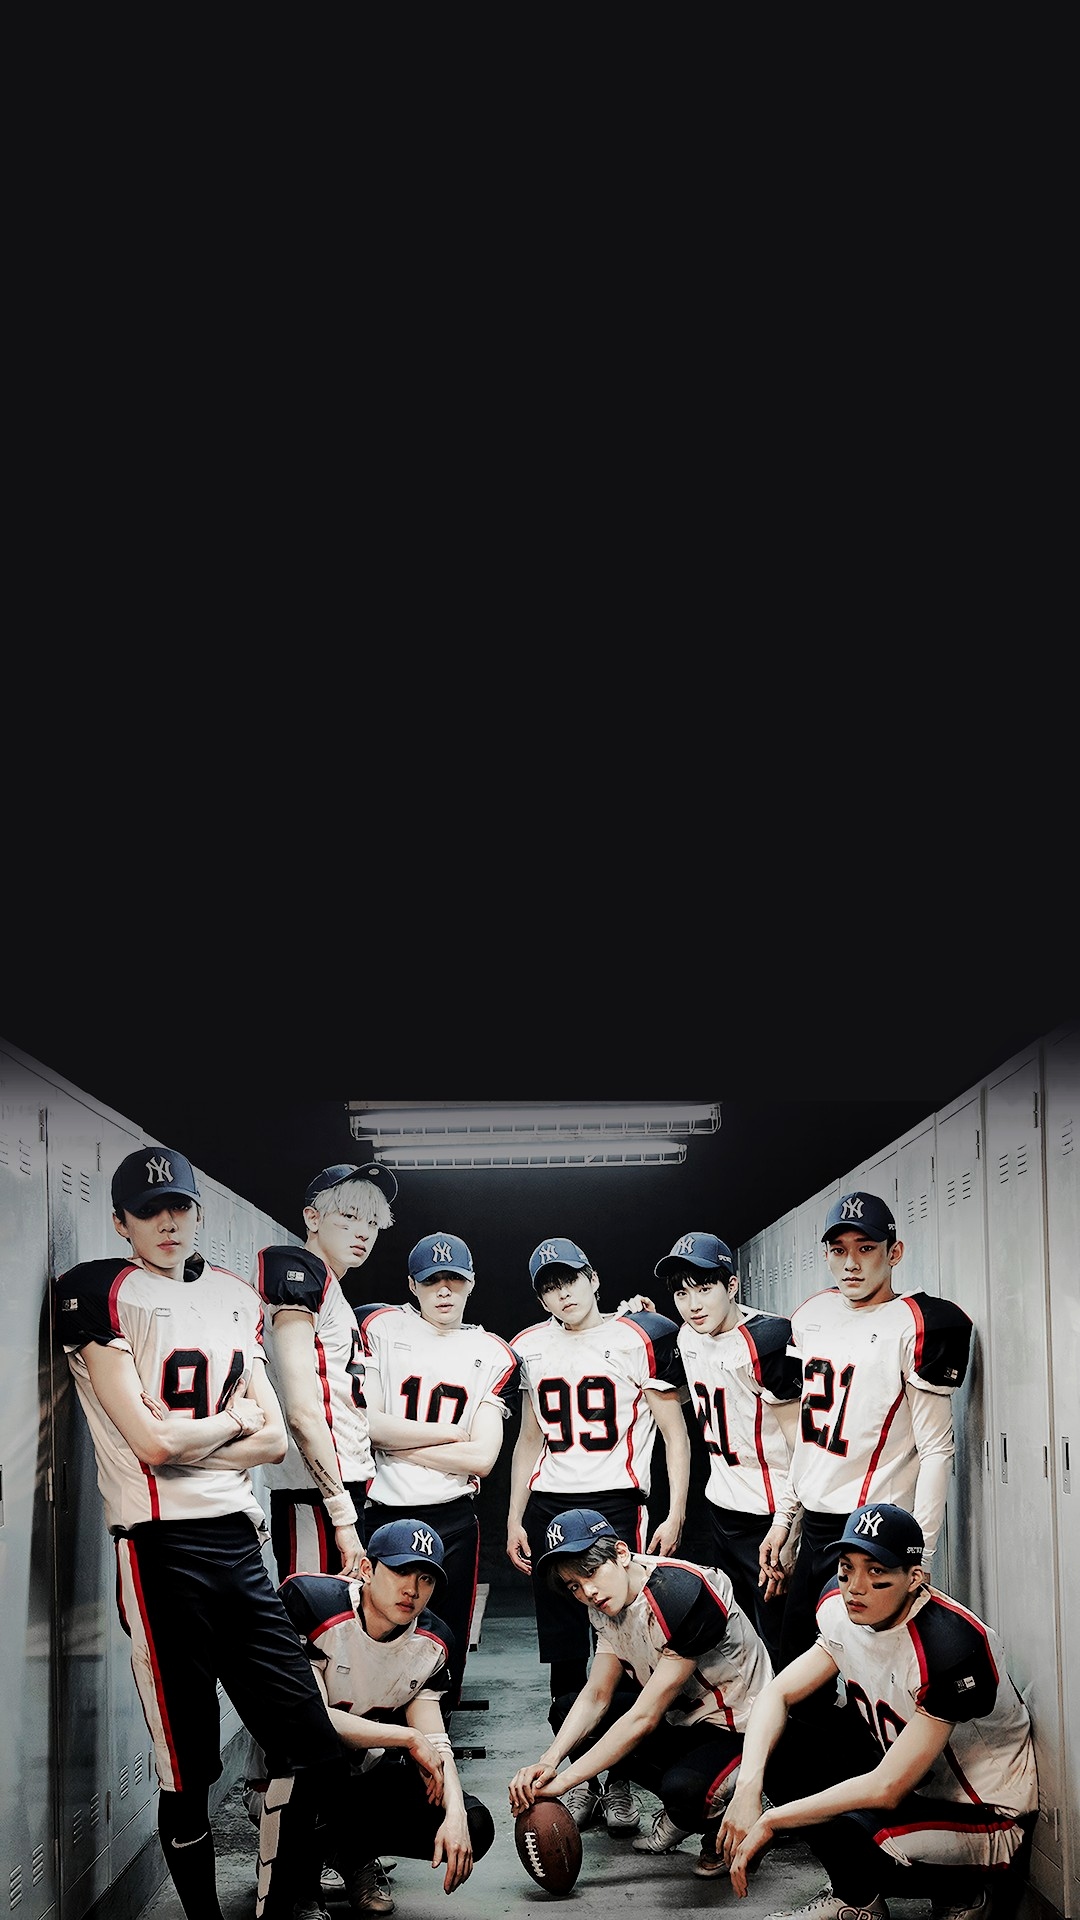 exo wallpaper,team,font,competition event,player,team sport